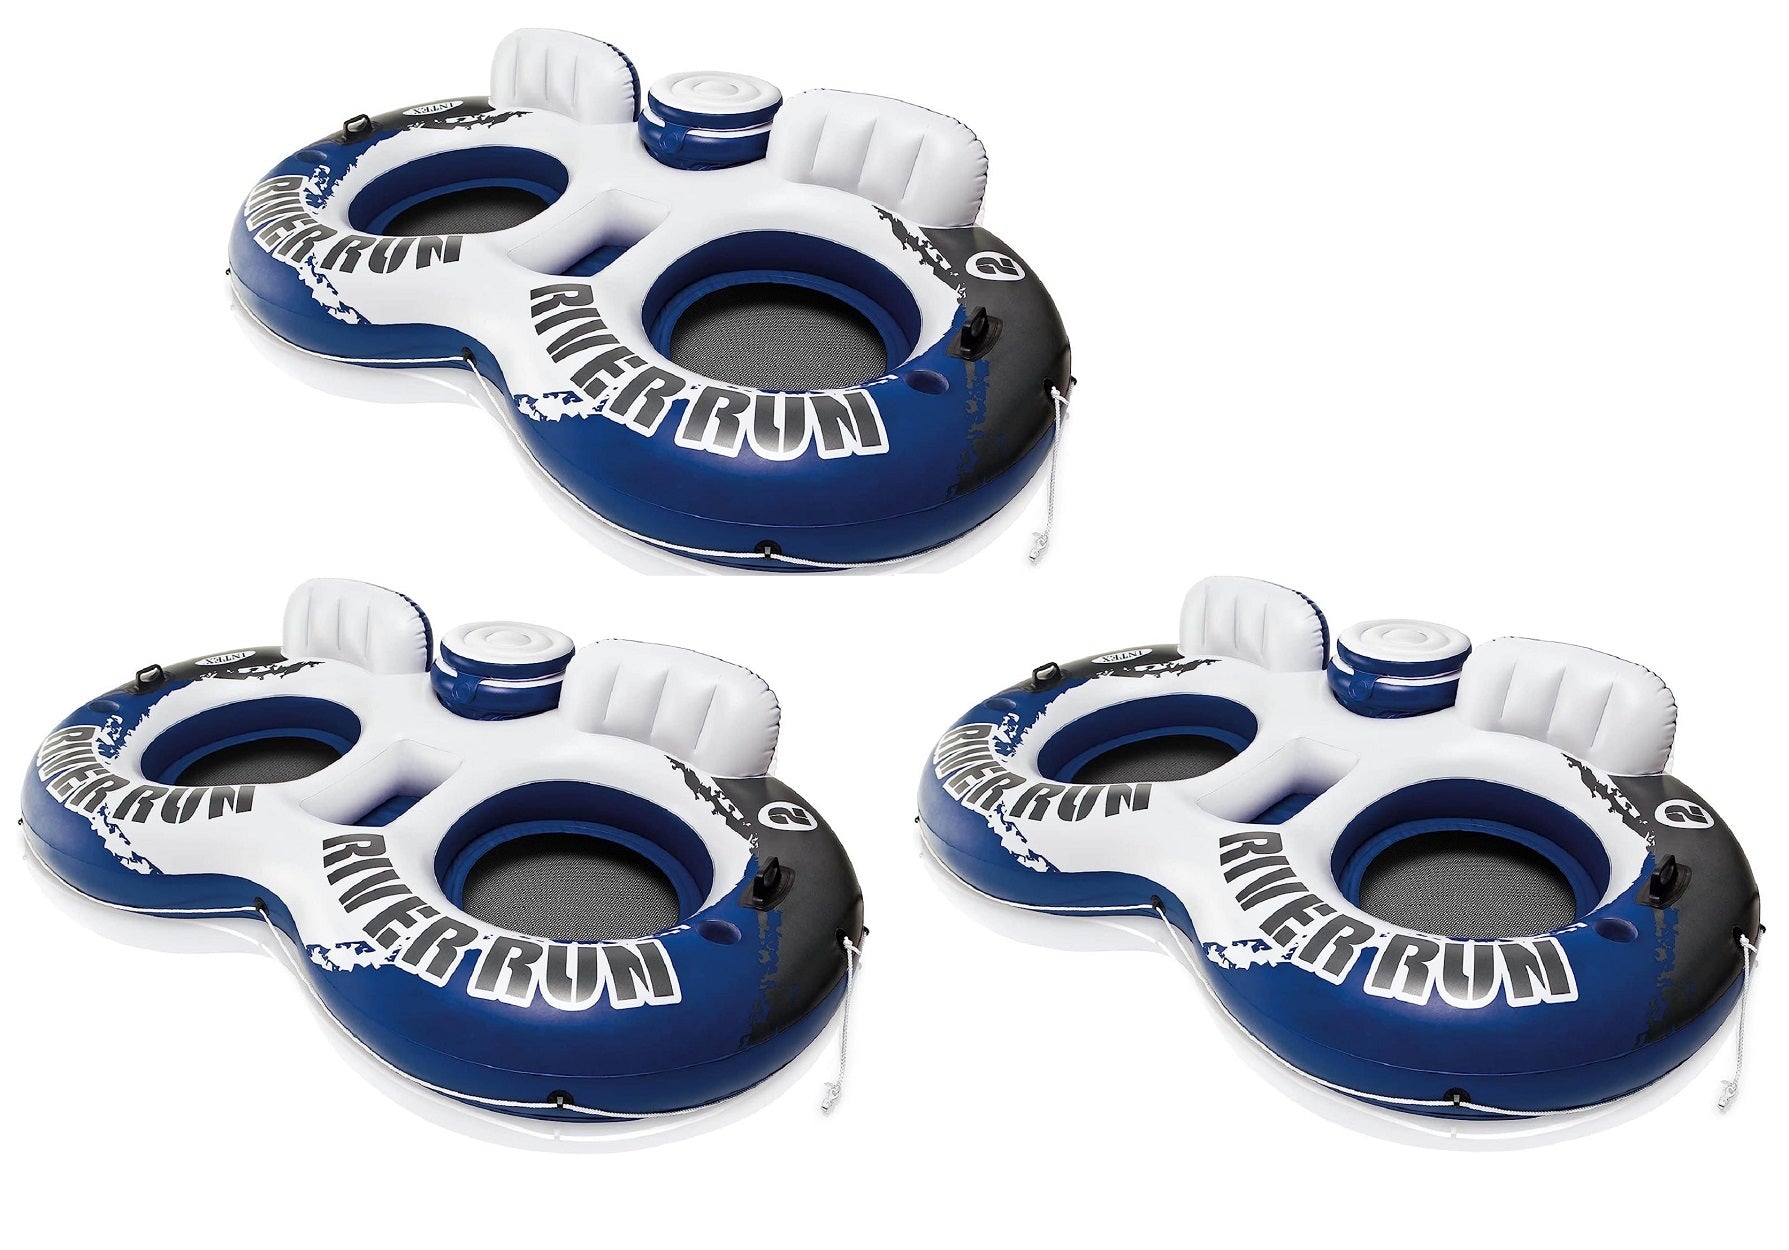 Intex River Run II 2-Person Water Tube w/ Cooler and Connectors (3 Pack)